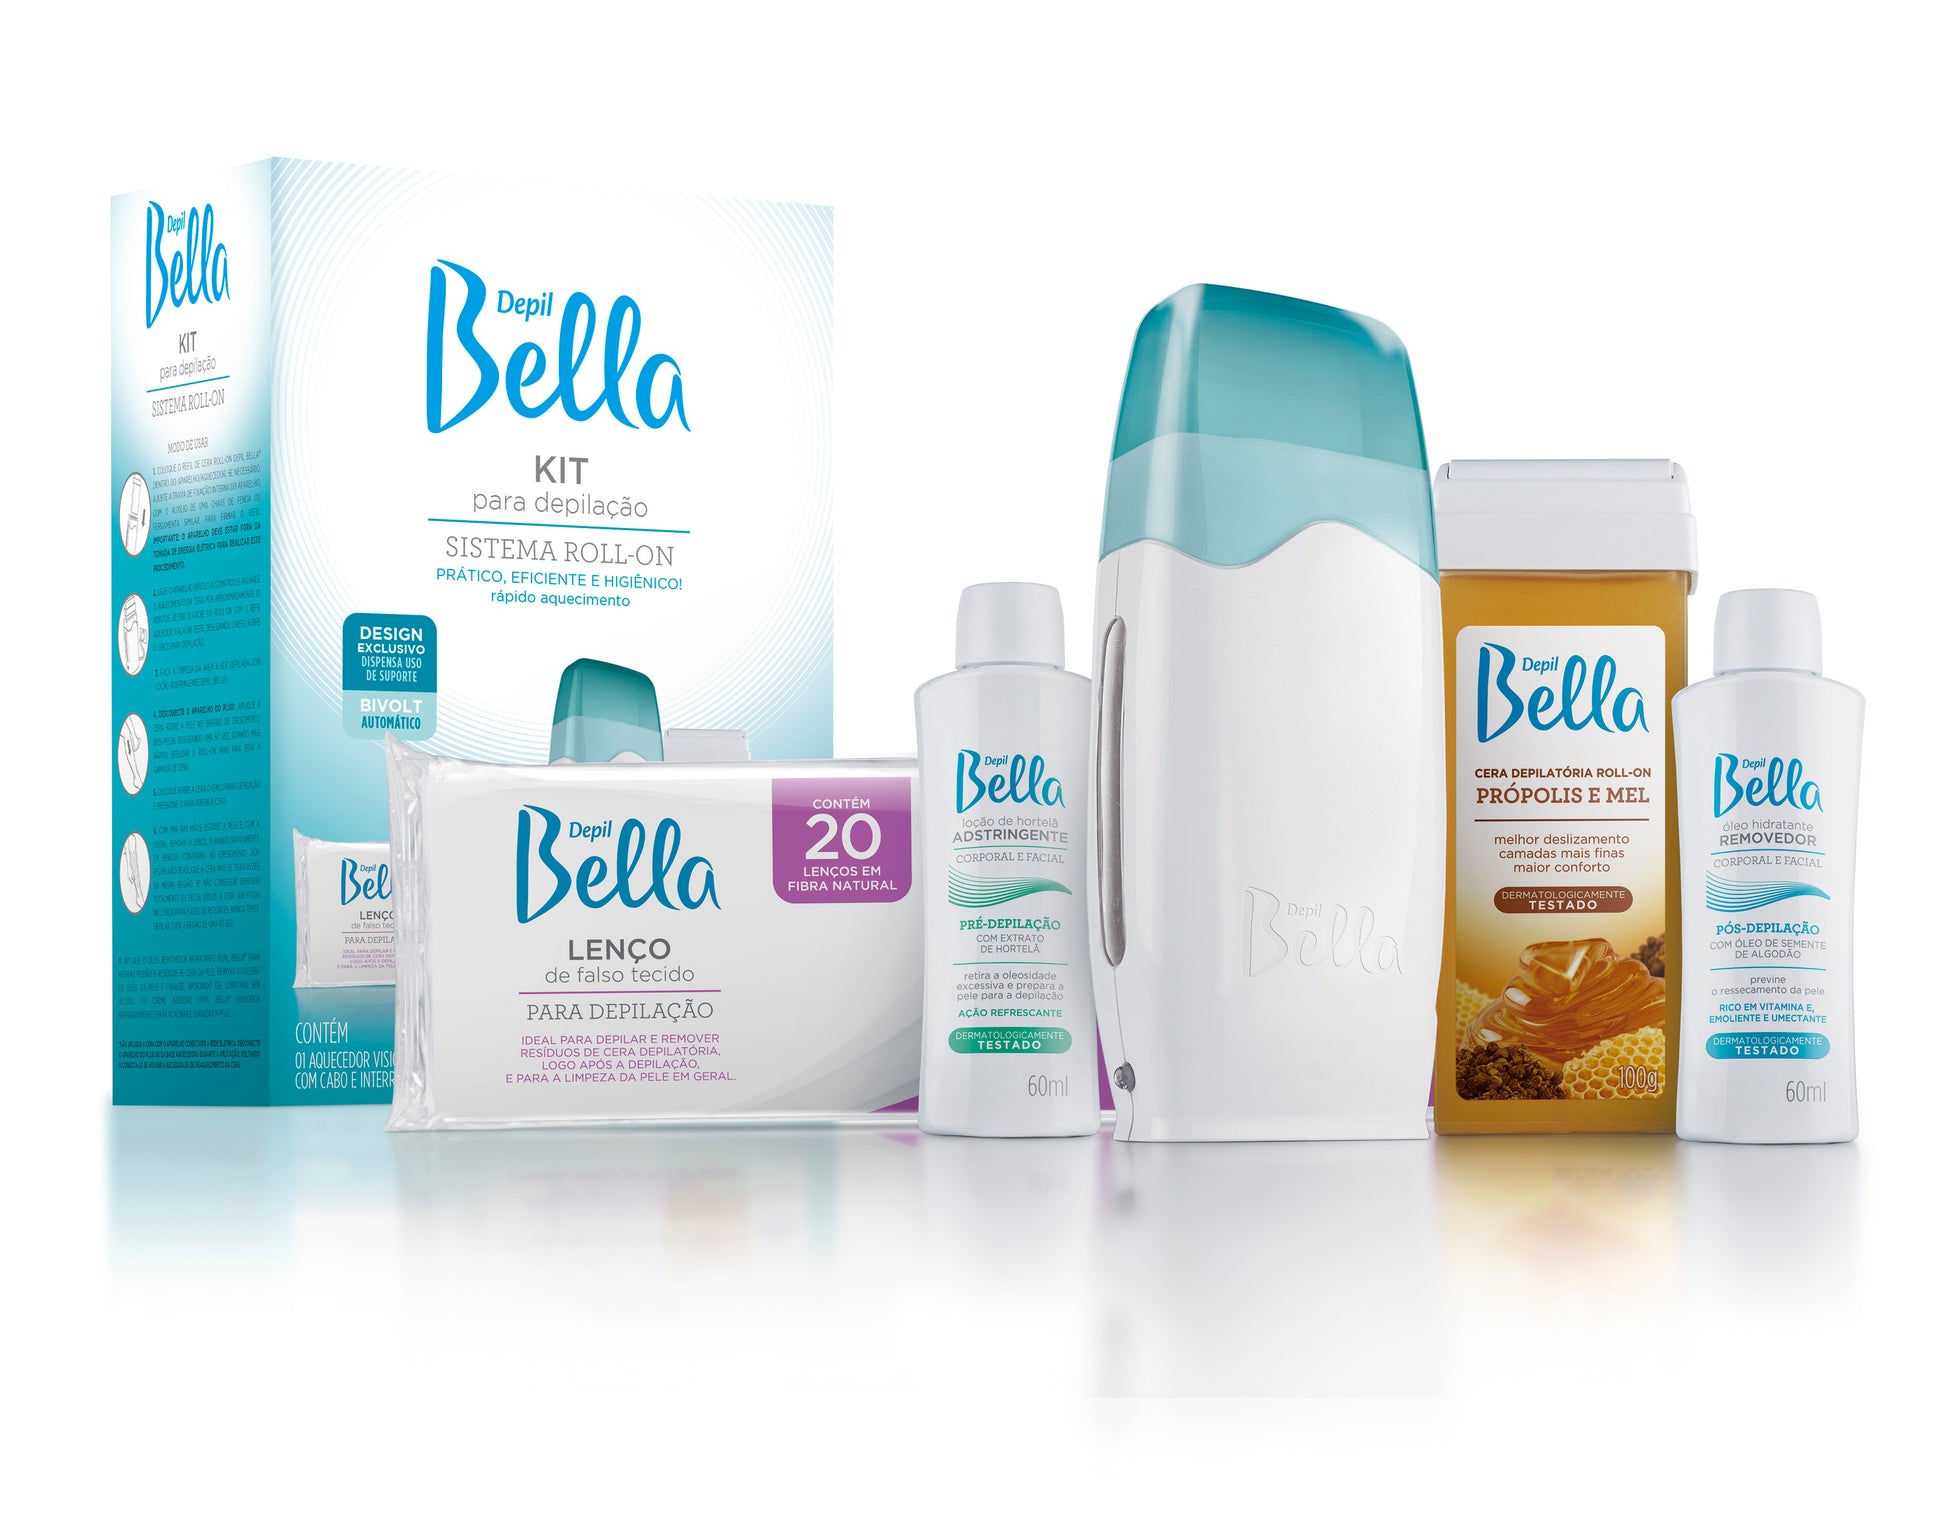 Kit Depil Bella Hair Removal Waxing - (3 Units Offer) - Depilcompany